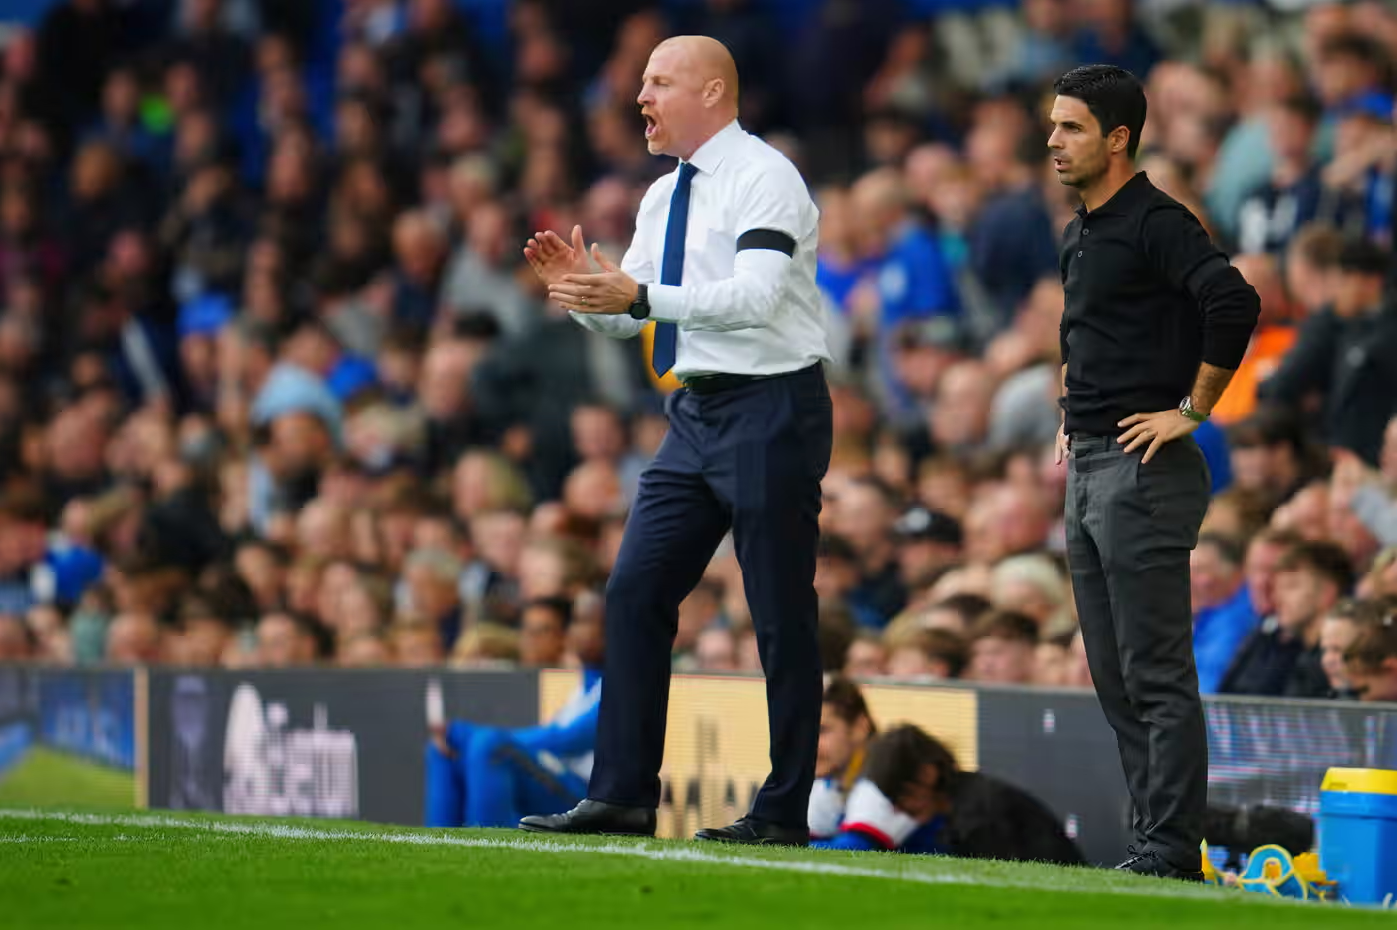 The tale of two manager, Sean Dyche - left and Arnela gaffer Mikel Arteta. (Photograph: Jon Super/AP)